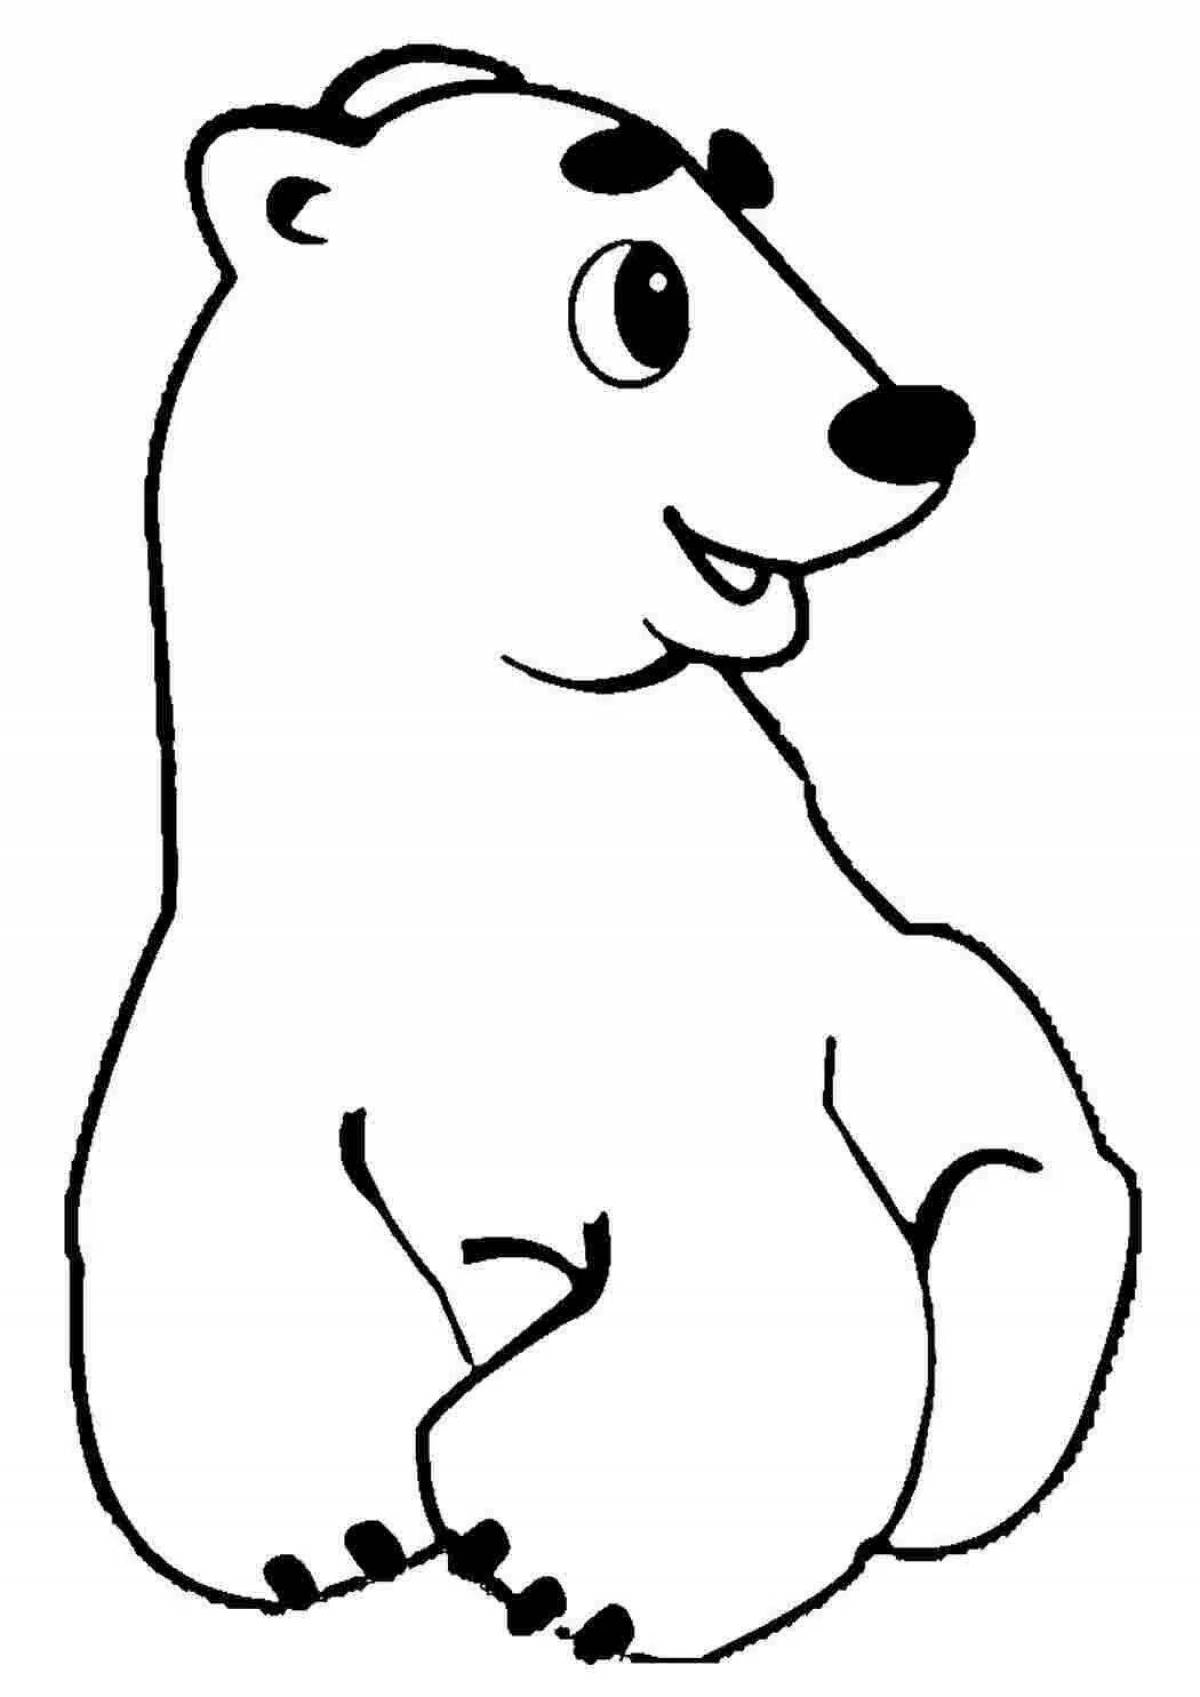 Adorable polar bear coloring book for children 2-3 years old